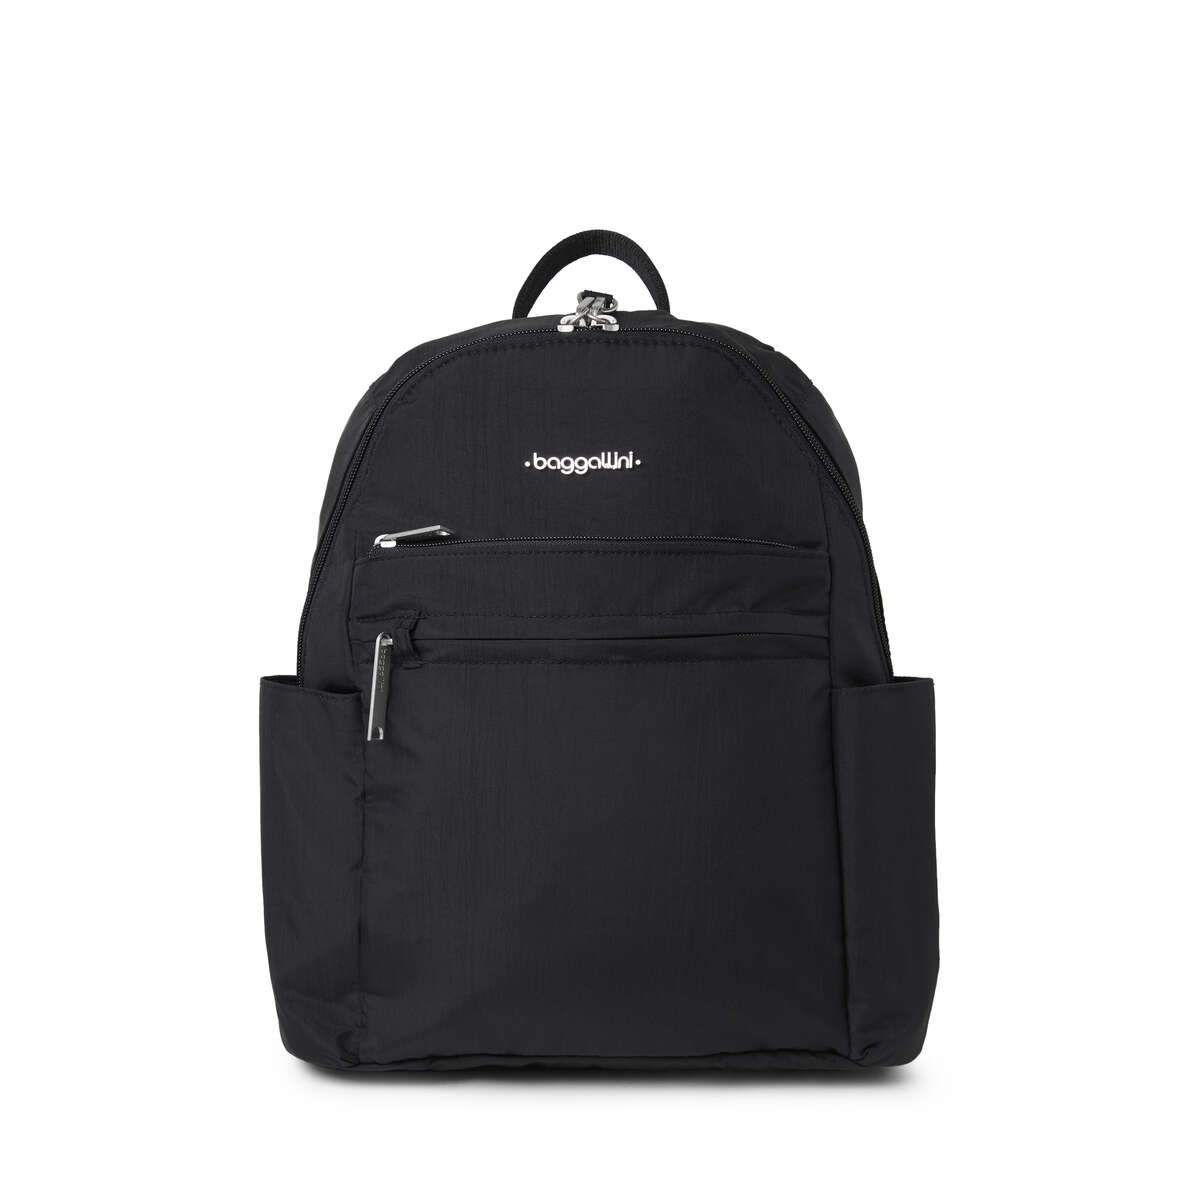 Baggallini Anti-Theft Vacation Backpack - Black